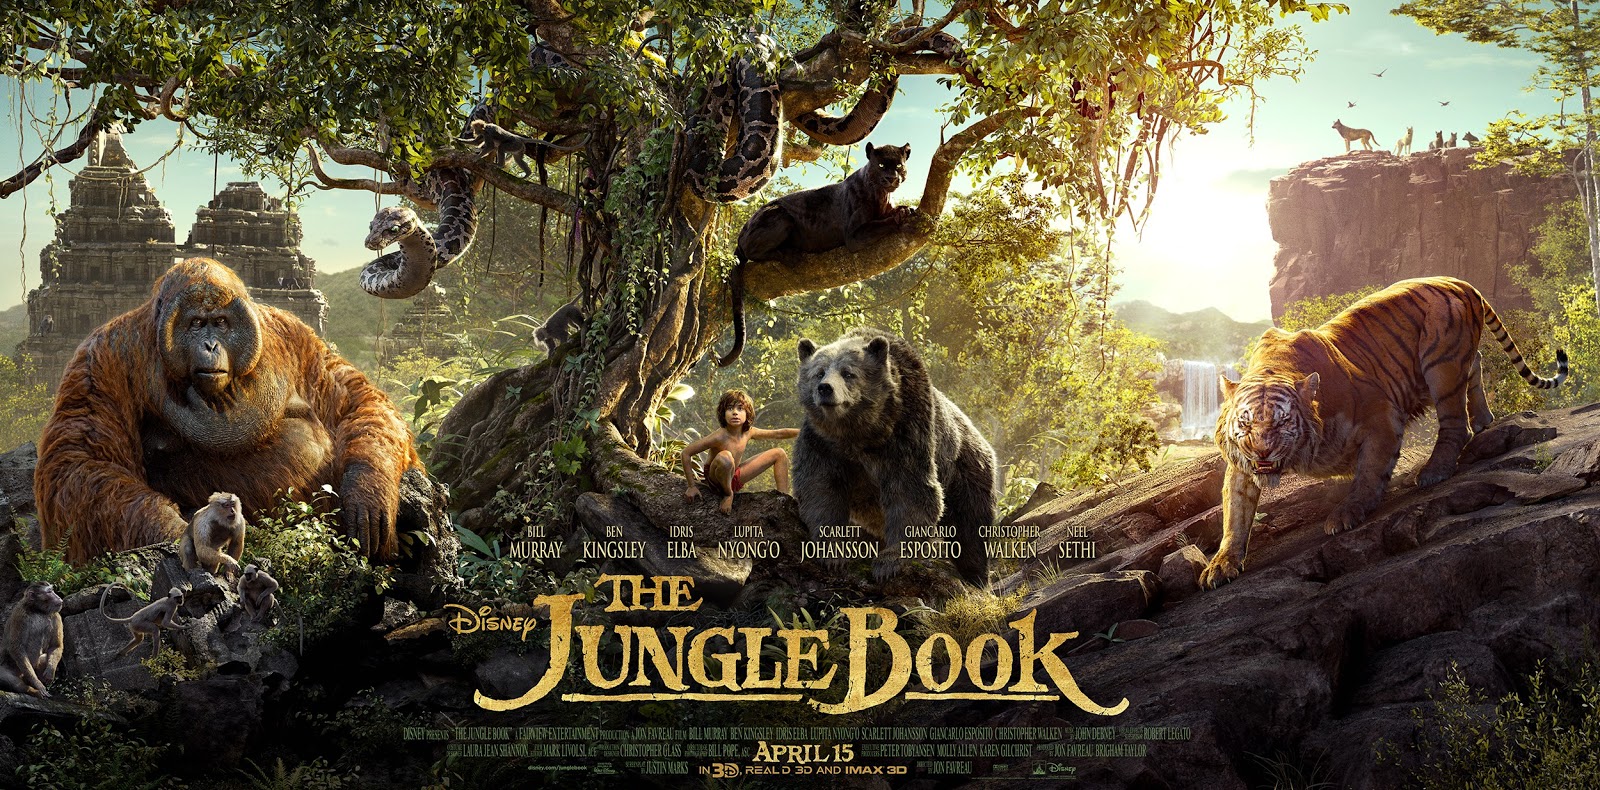 The Jungle Book (2016) Review – What's On Disney Plus